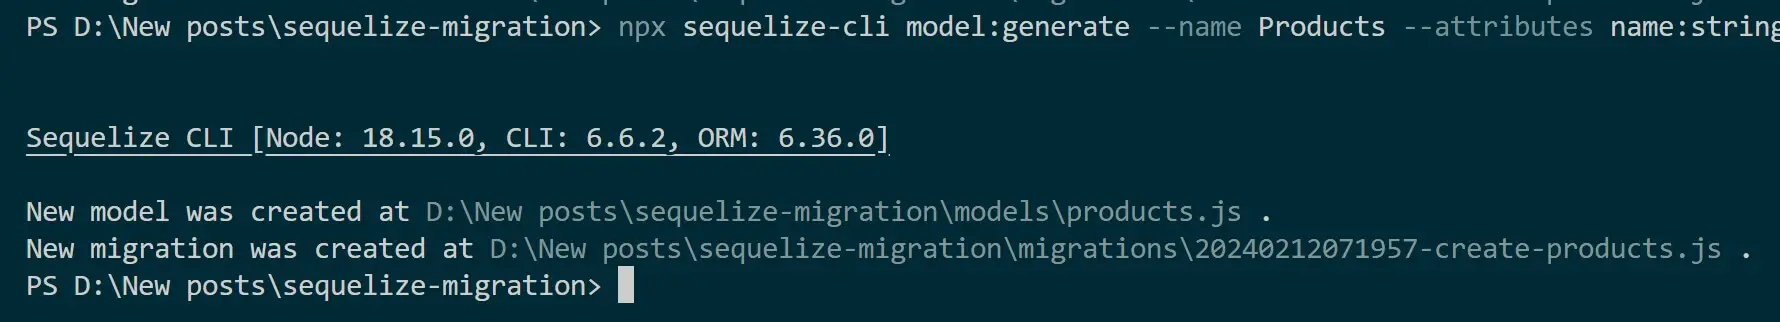 Create|Generate|Run Sequelize CLI db Migrations With Nodejs